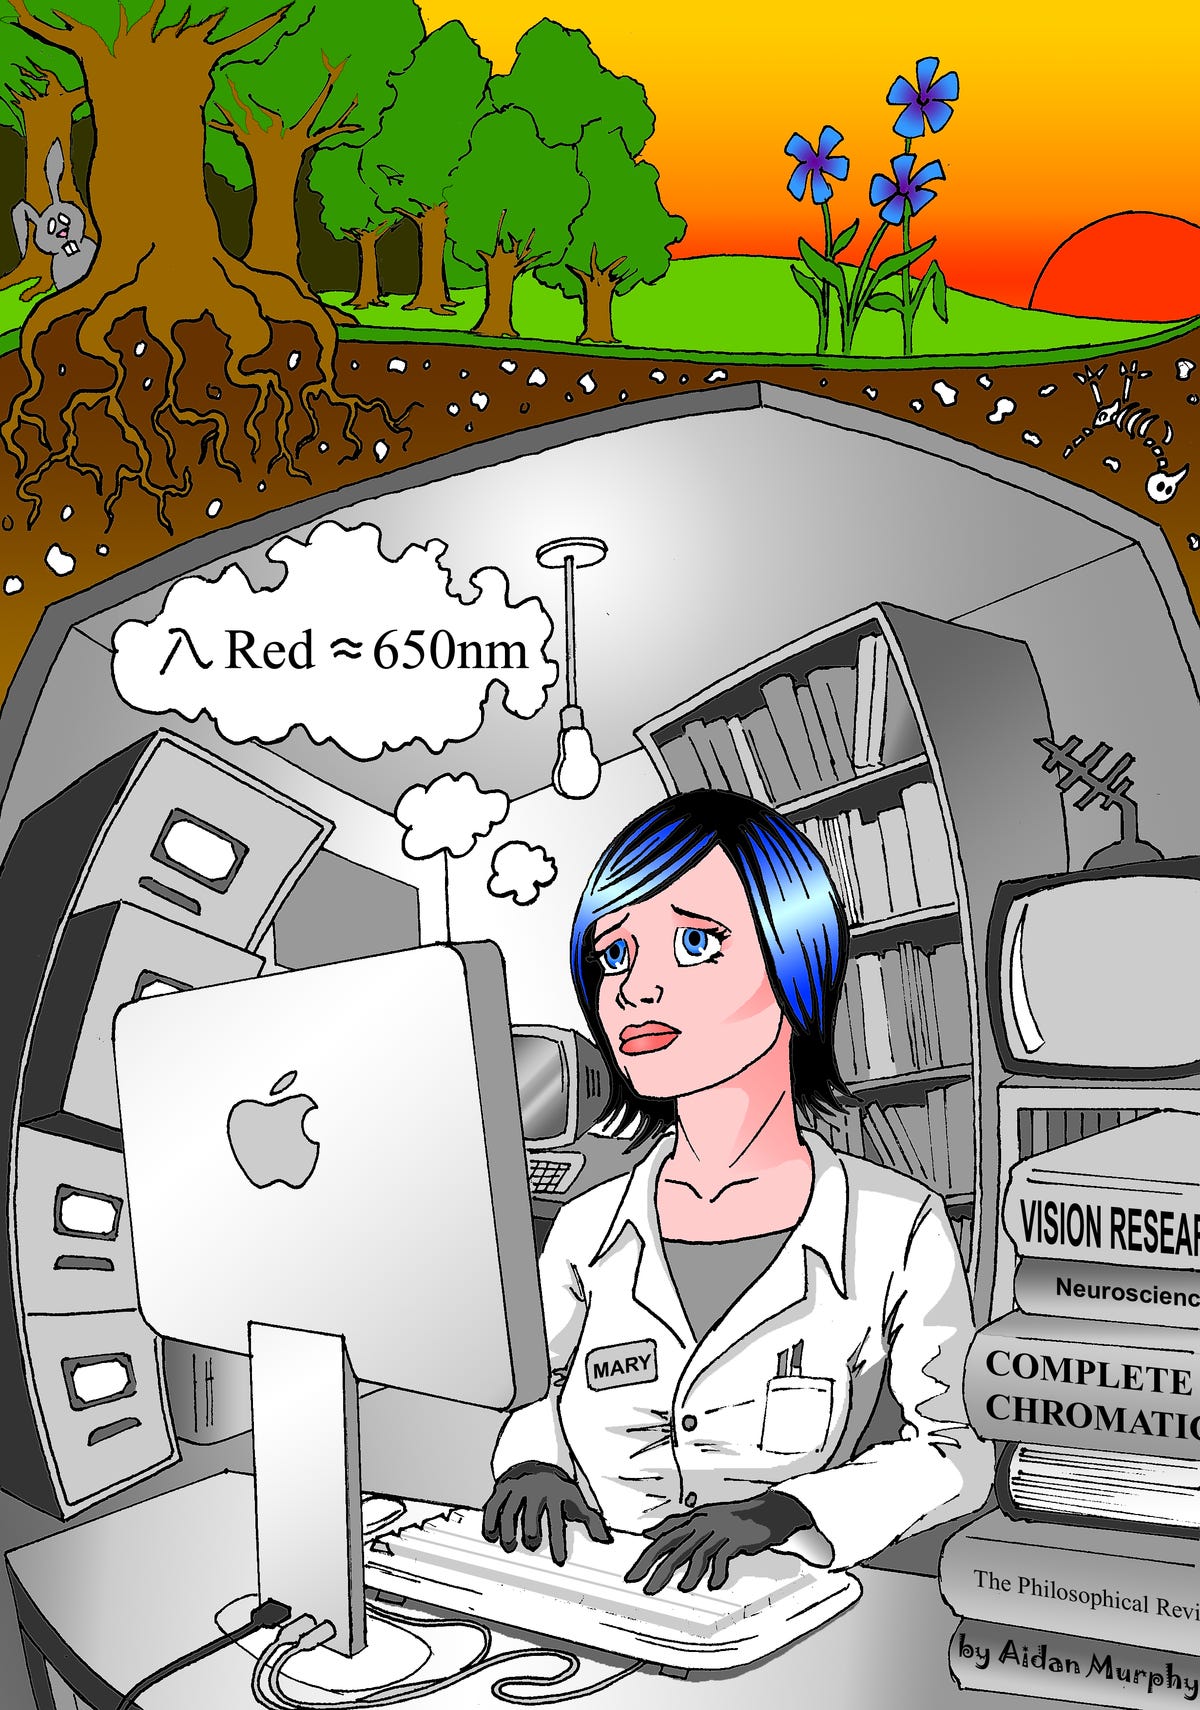 File:Mary colour scientist.png - Wikimedia Commons